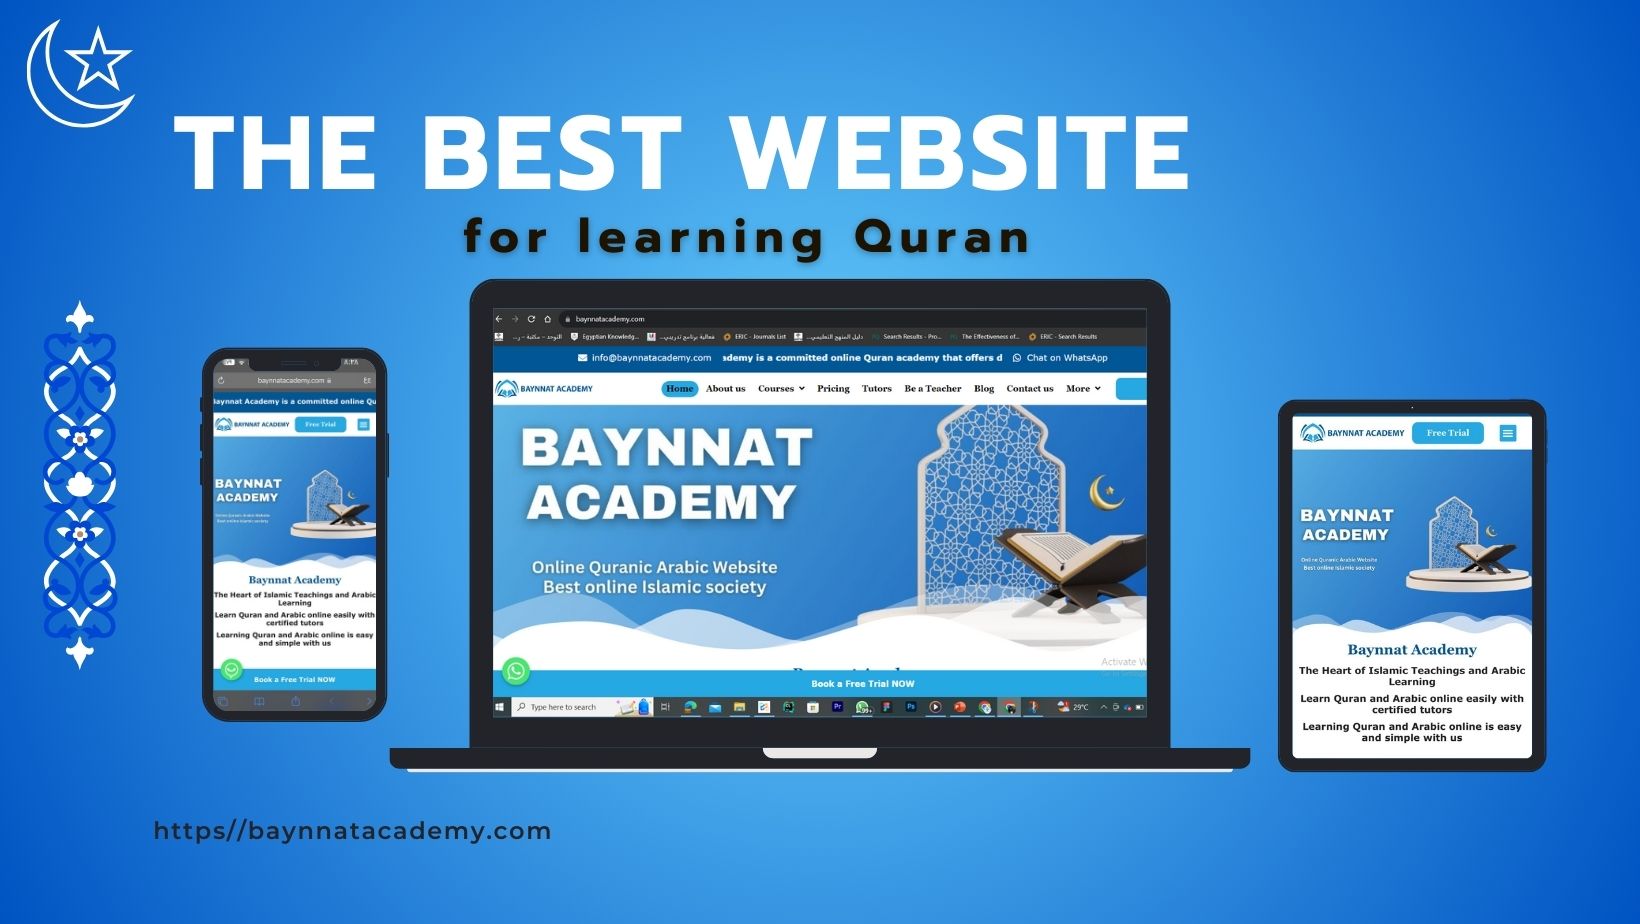 Which is the best website for learning Quran?